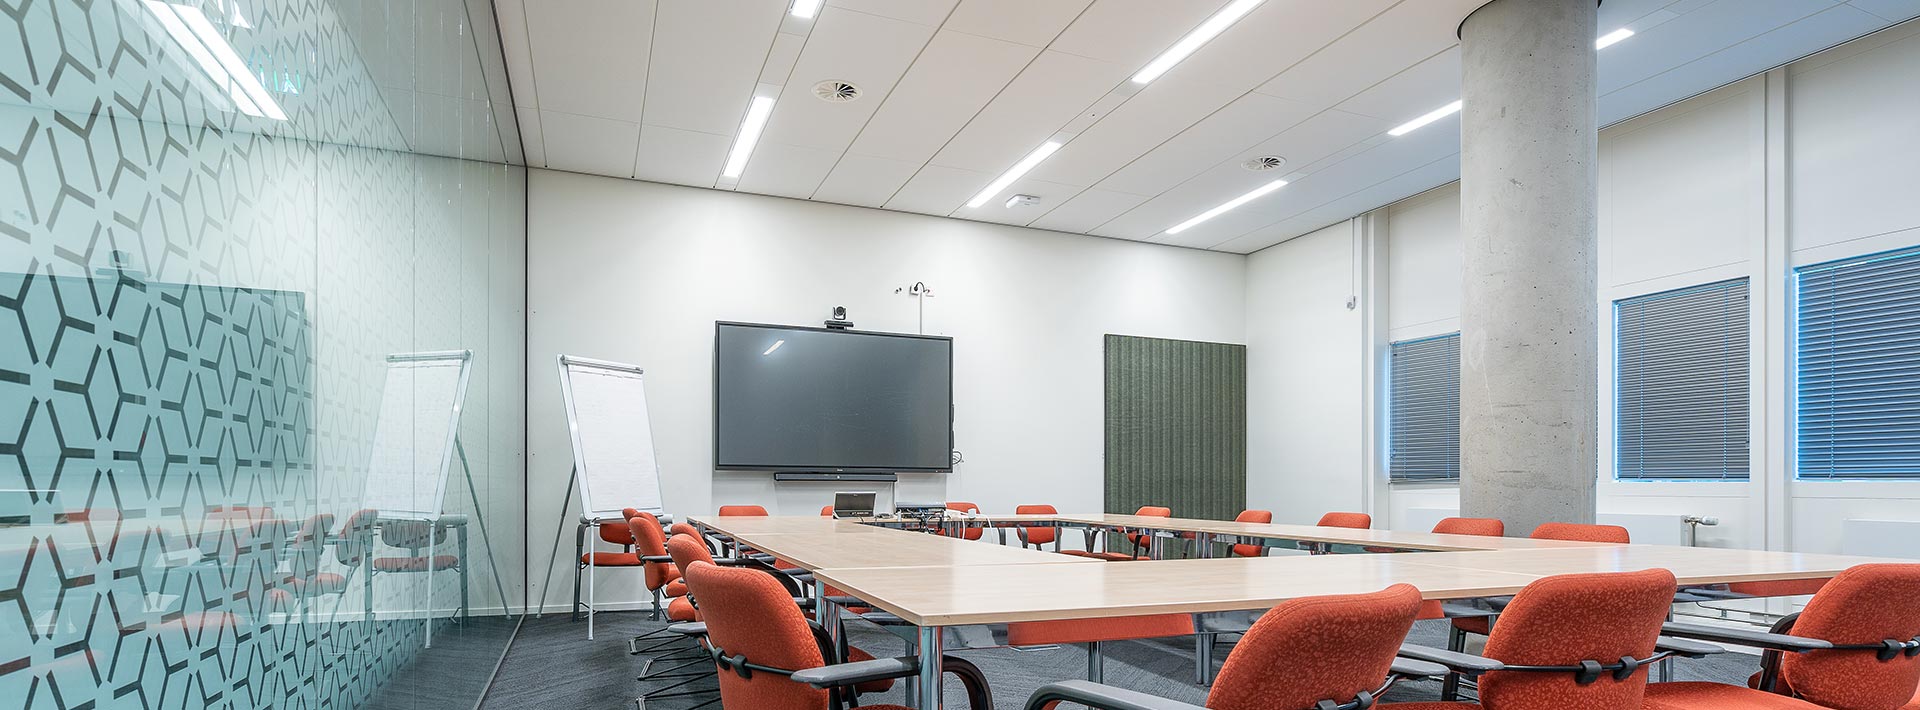 conference room interior of a modern office with LED lighting